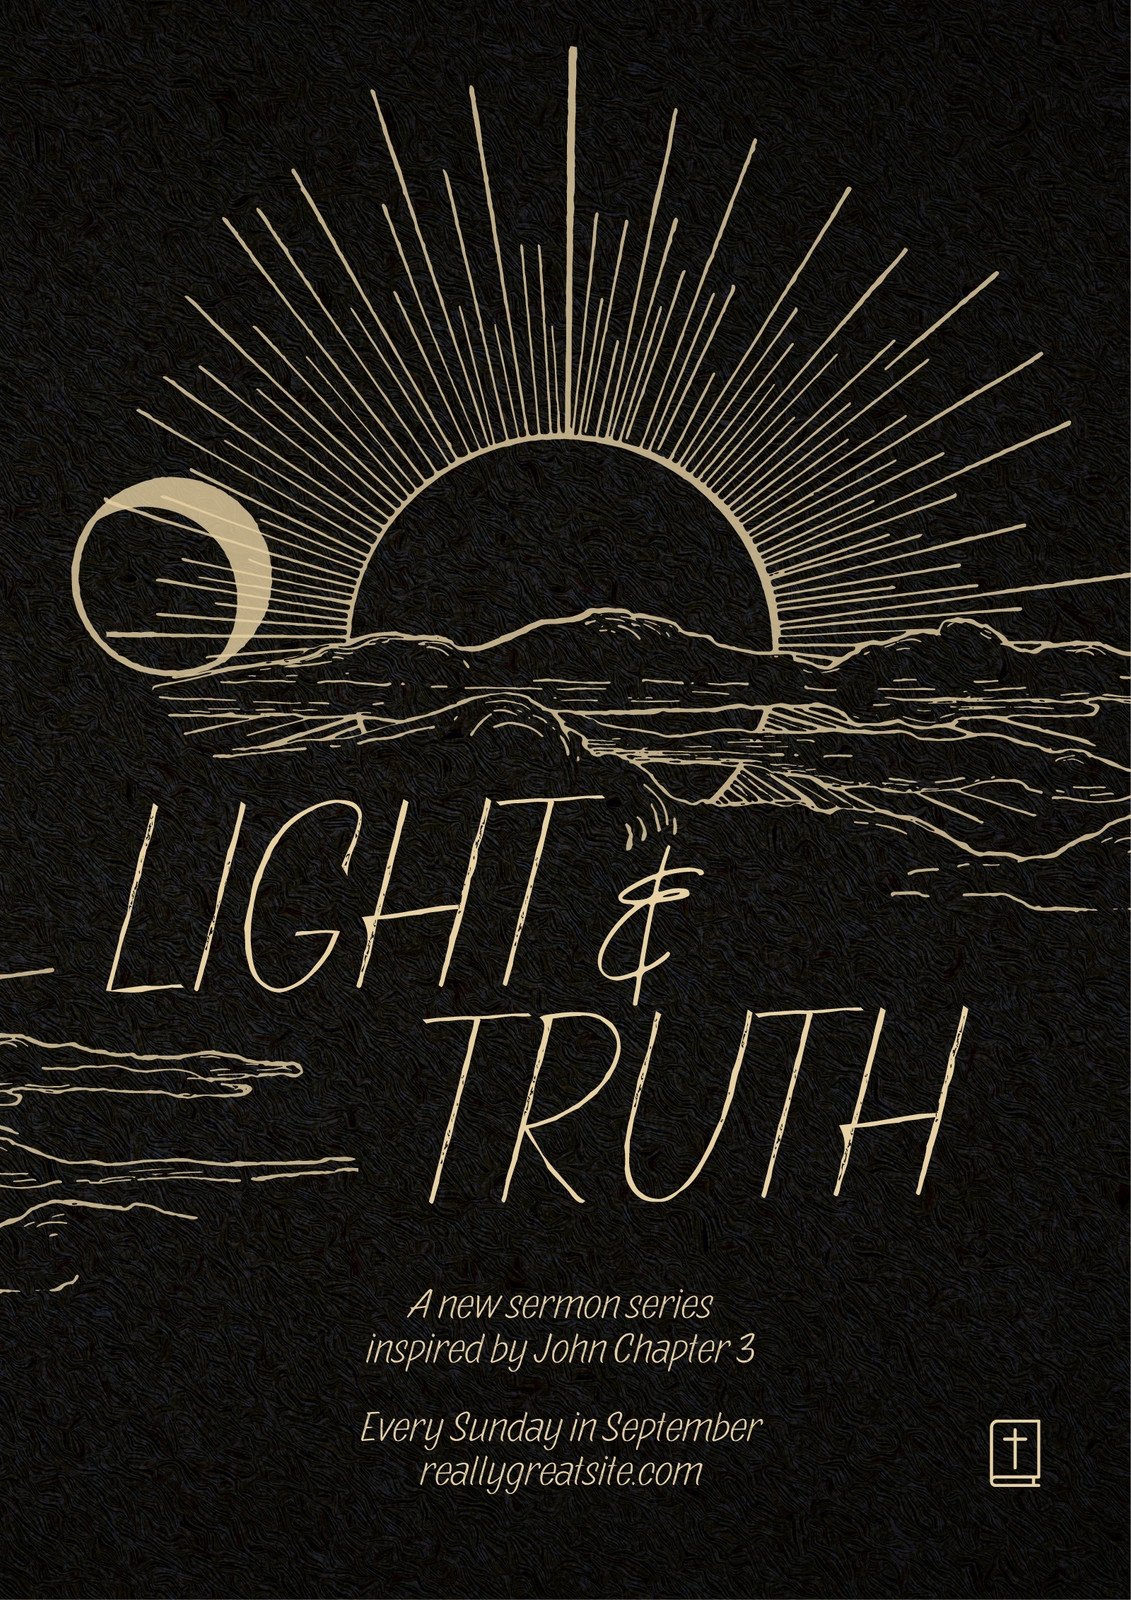 Black Gold Light and Truth Christian Sermon Series Poster